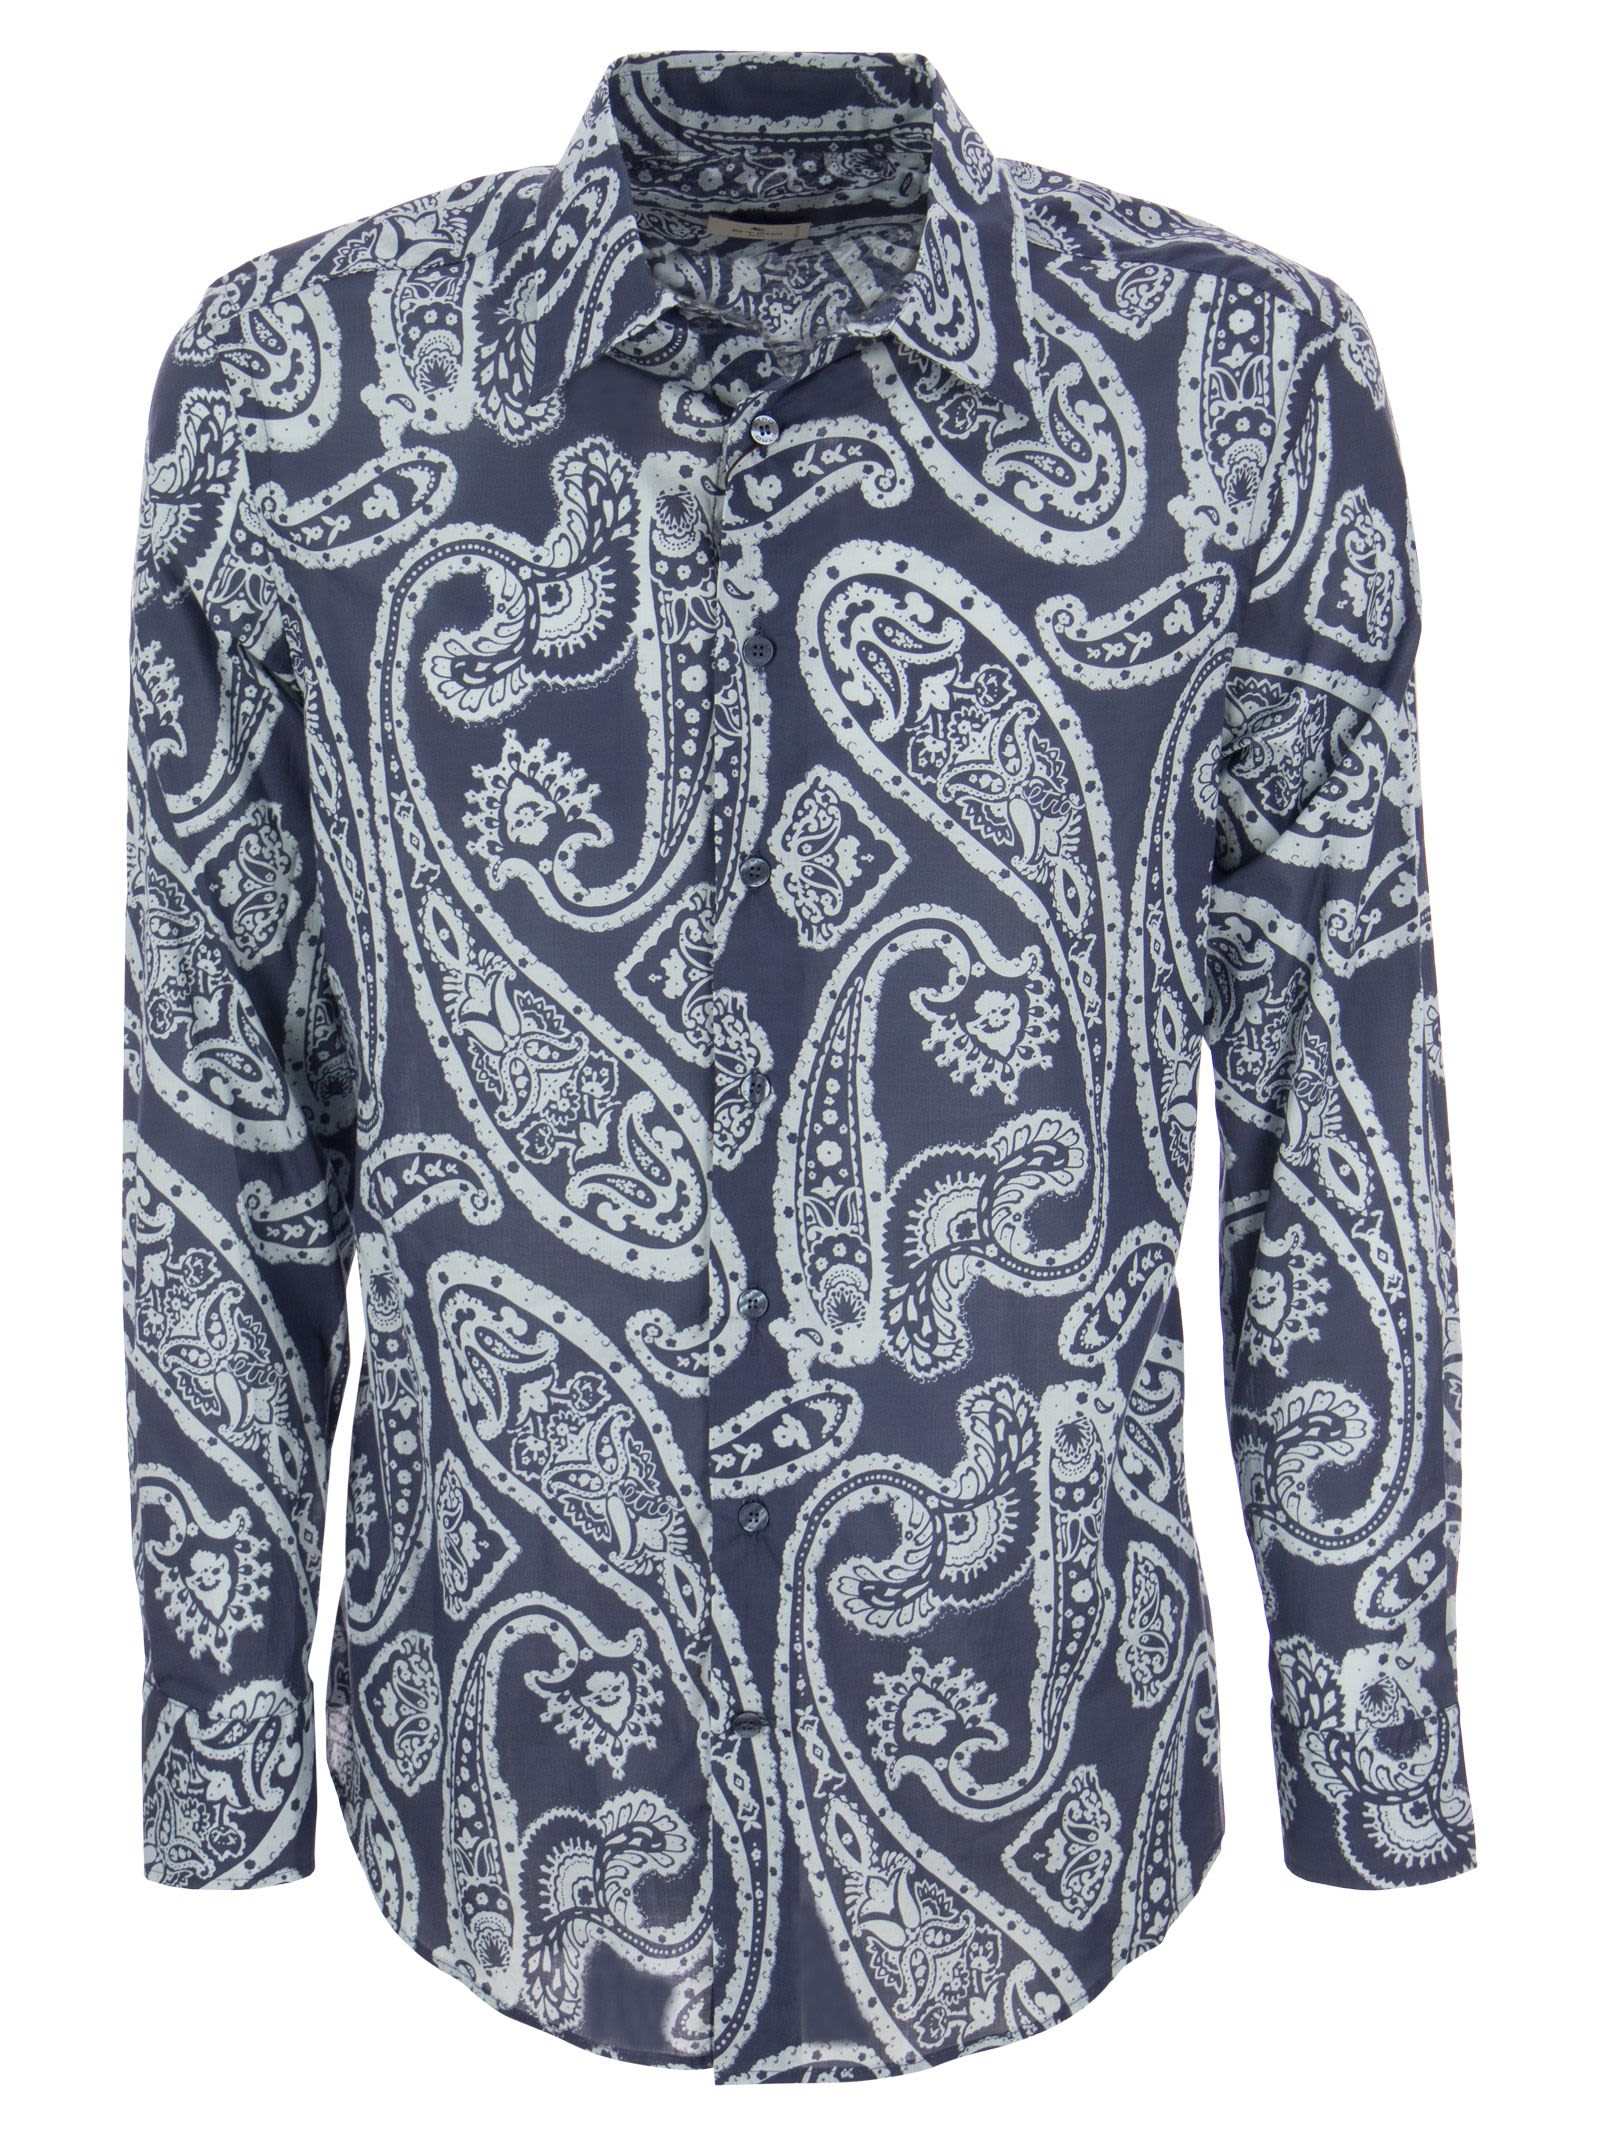 ETRO SLIM FIT SHIRT WITH PAISLEY PATTERN